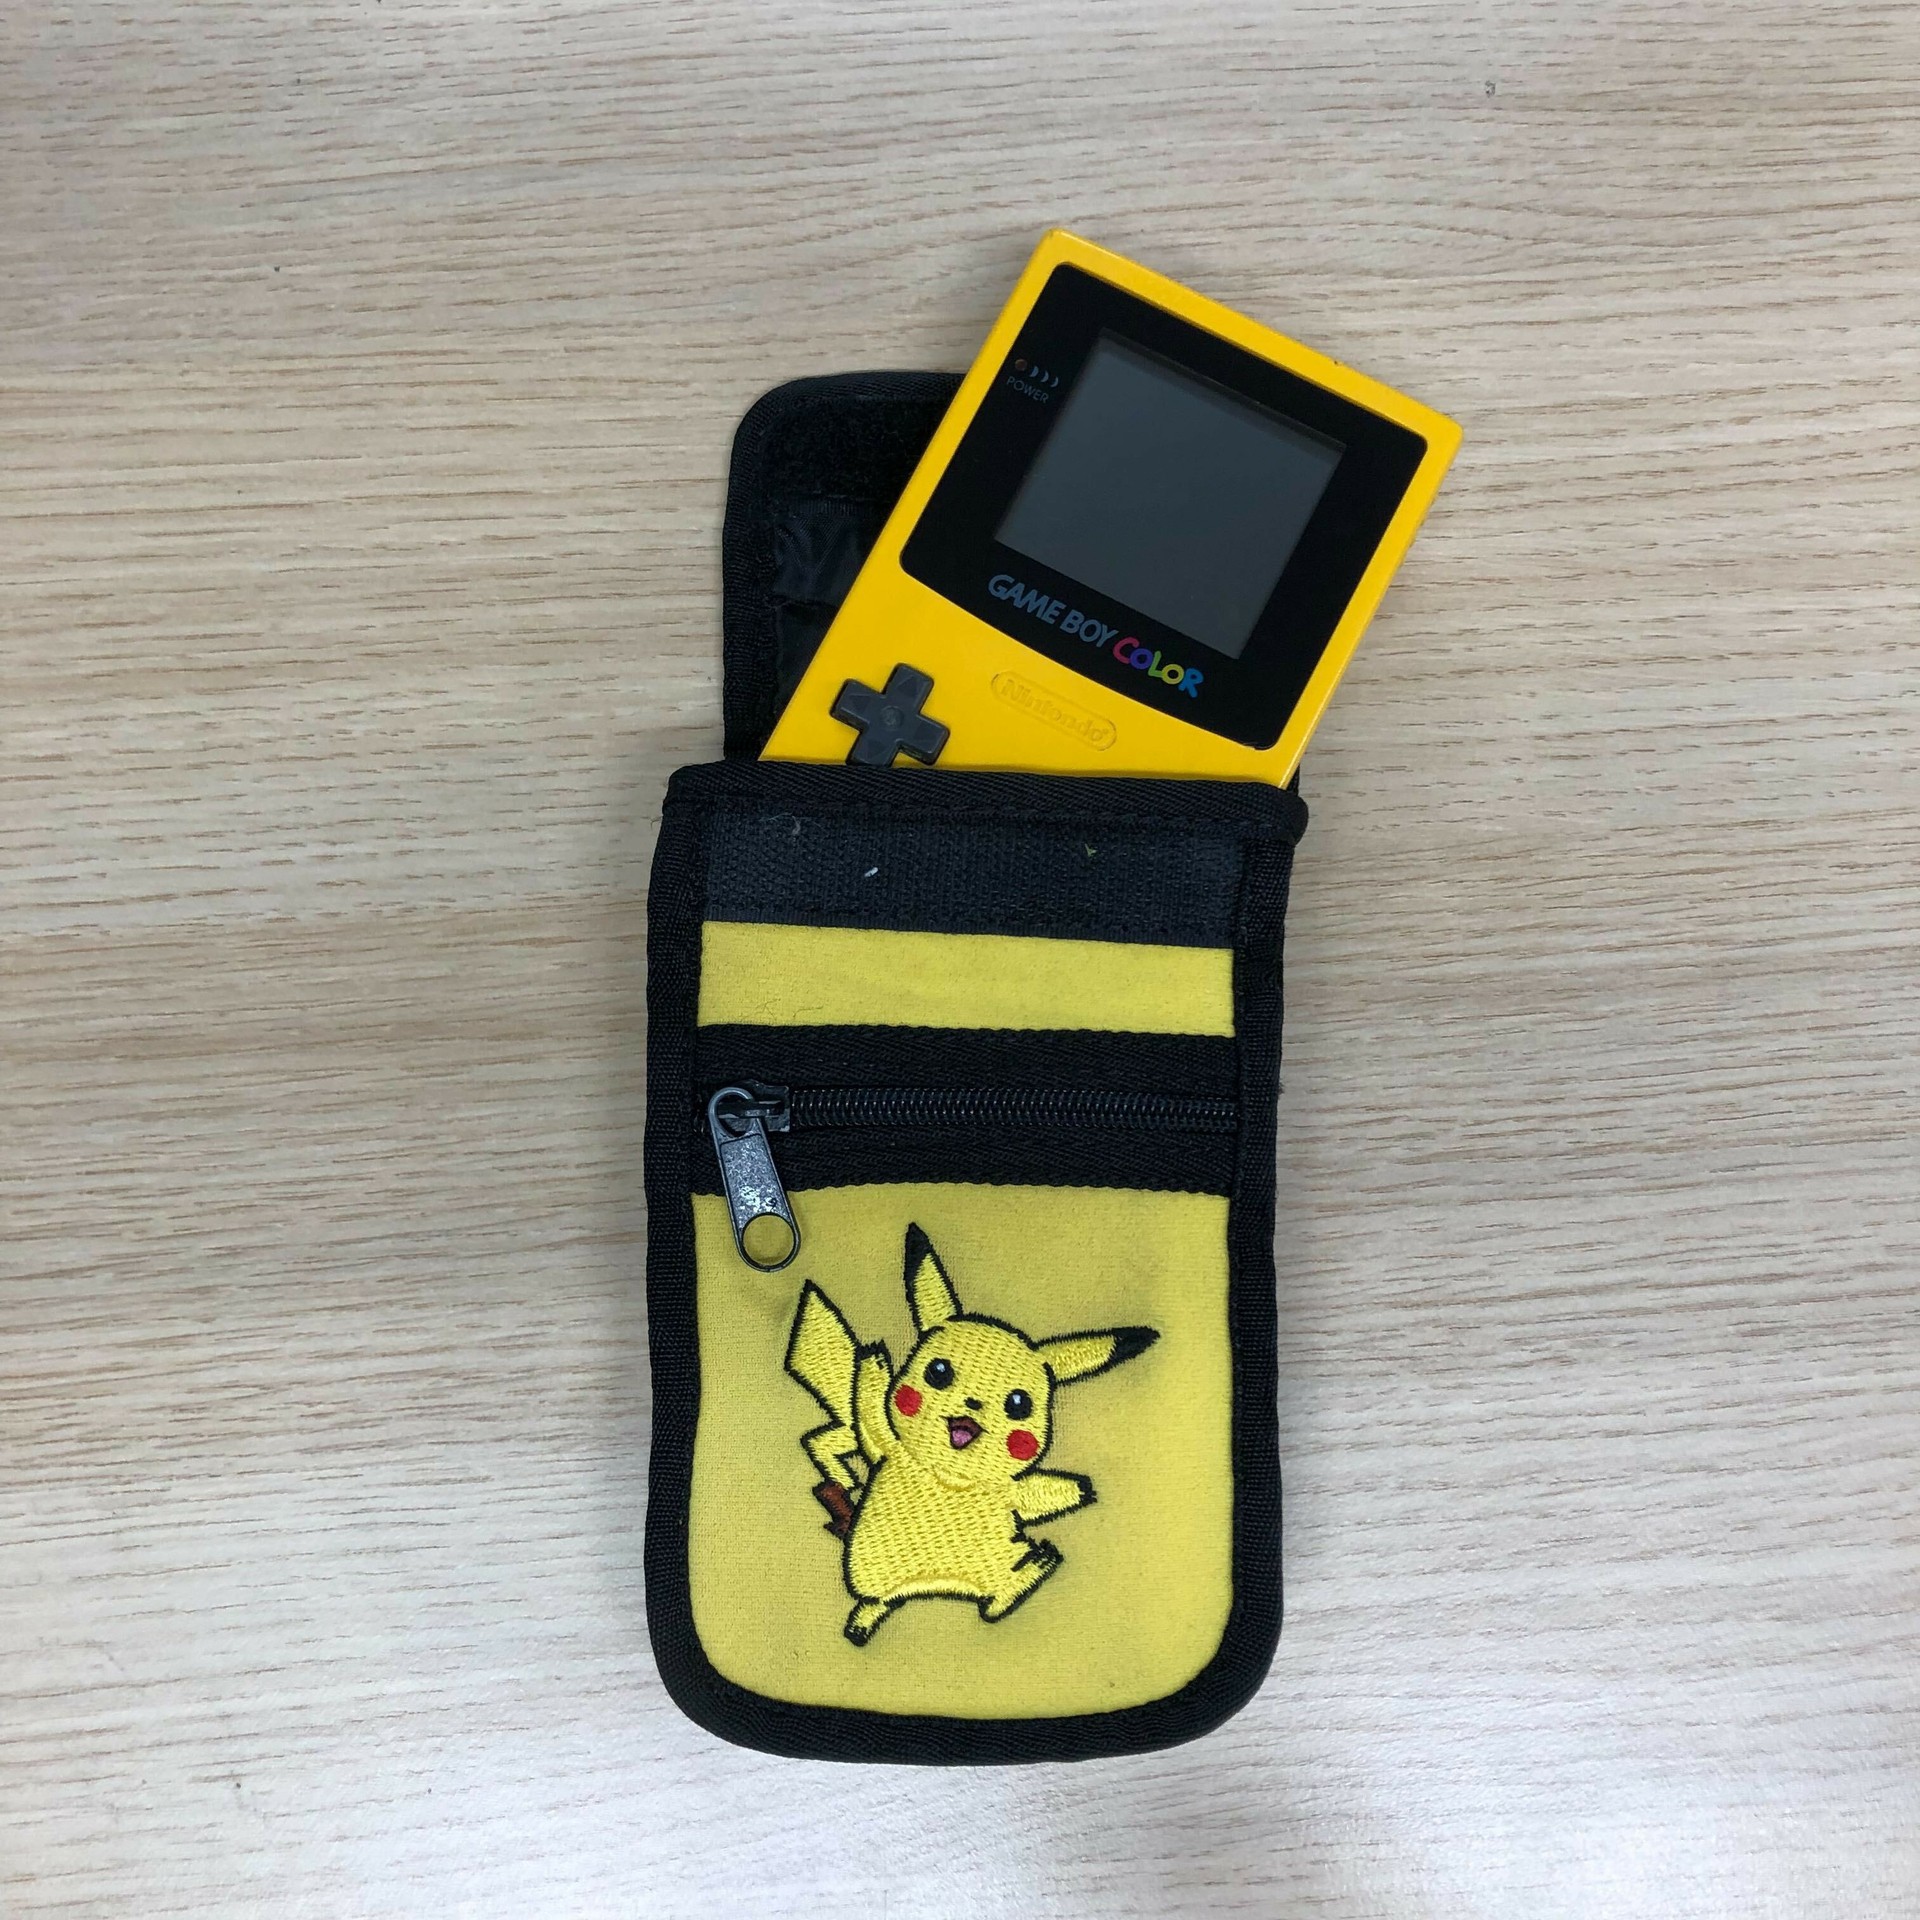 Pokemon Yellow Pikachu - Gameboy Color Case - Gameboy Color Hardware - 2